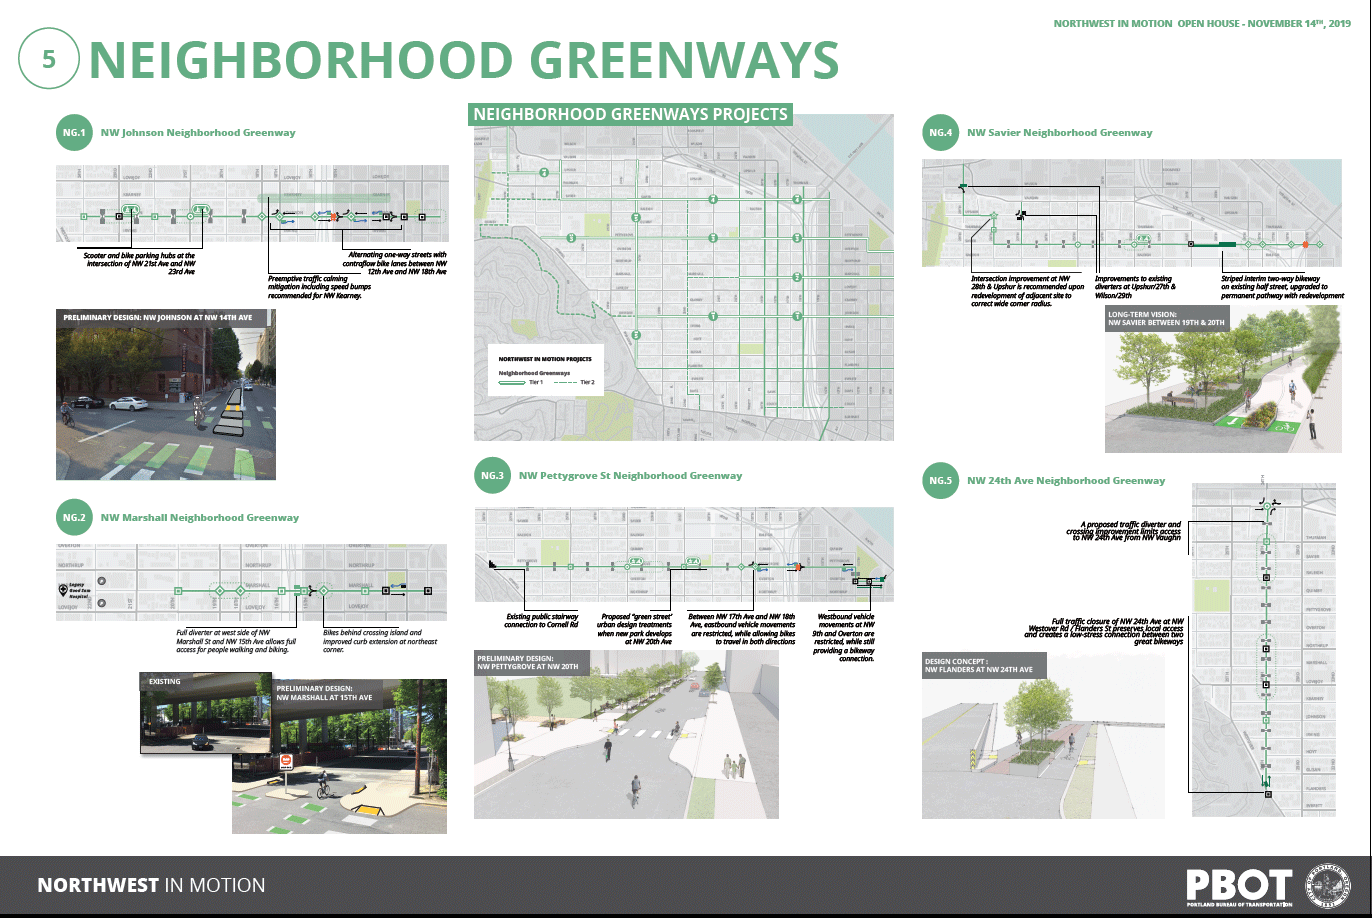 Board shows: An overview of all of the neighborhood greenway projects that are part of this project. A drawing shows what a permanent pathway would look like, with a fully separated space for bicycling. A drawing shows what Northwest Johnson at 14th Avenue would look like, with a new crossing for bikes and diverters to reduce vehicles cutting through the neighborhood greenway. A drawing shows what Northwest Pettygrove at 20th Avenue would look like, with curb extensions and a crosswalk for people walking and a calmed street for people biking. A drawing shows what Northwest Marshall and 15th Avenue would look like, with a concrete diverter for cars, while still allowing bikes to ride through. A drawing shows what a potential traffic closed street would look like, with planters creating diverters, while still allowing bikes to travel through.